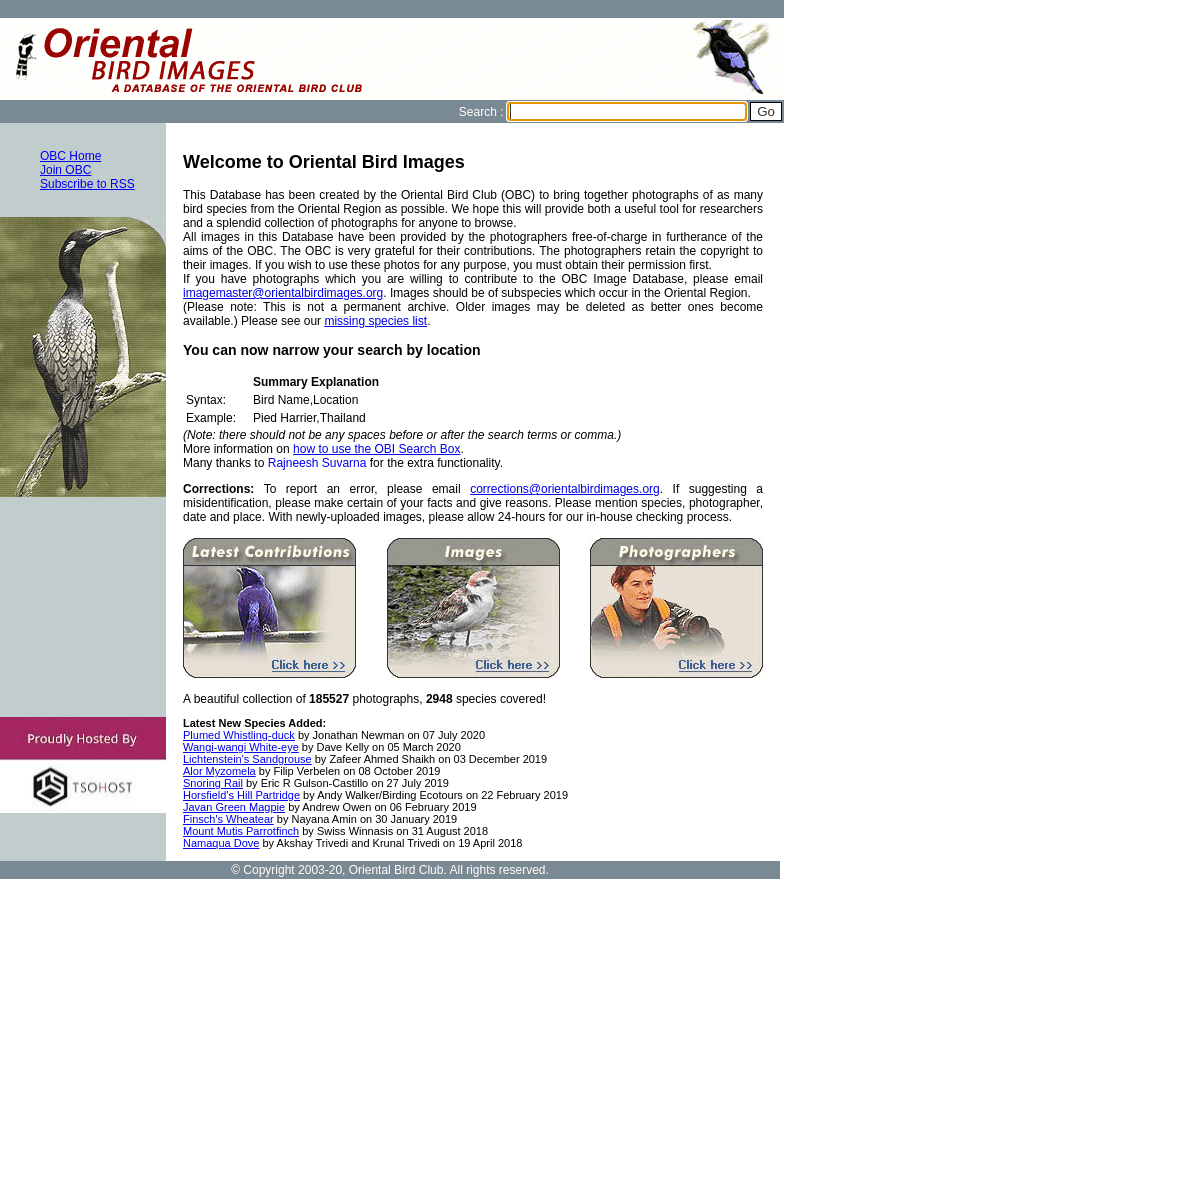 A complete backup of orientalbirdimages.org